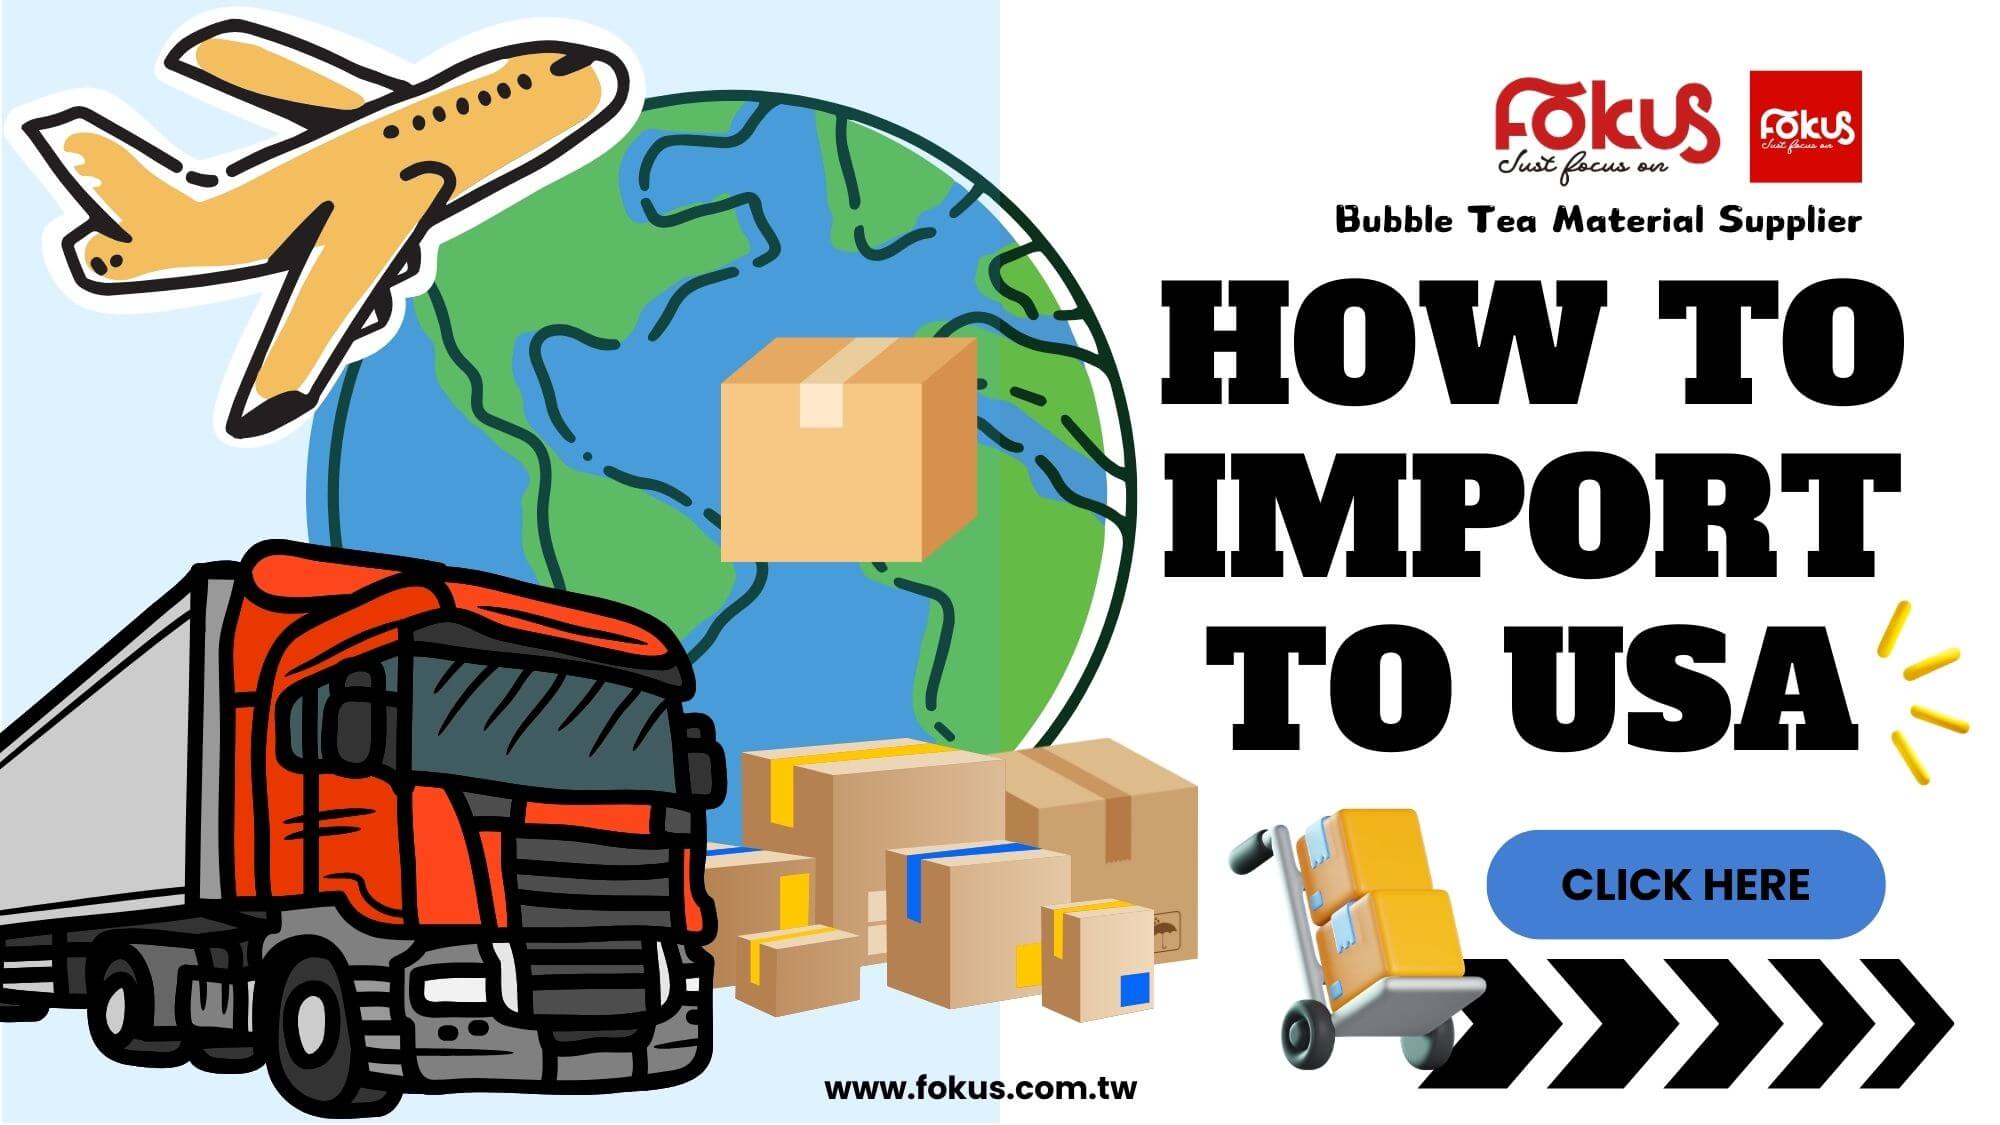 HOW TO IMPORT TO USA